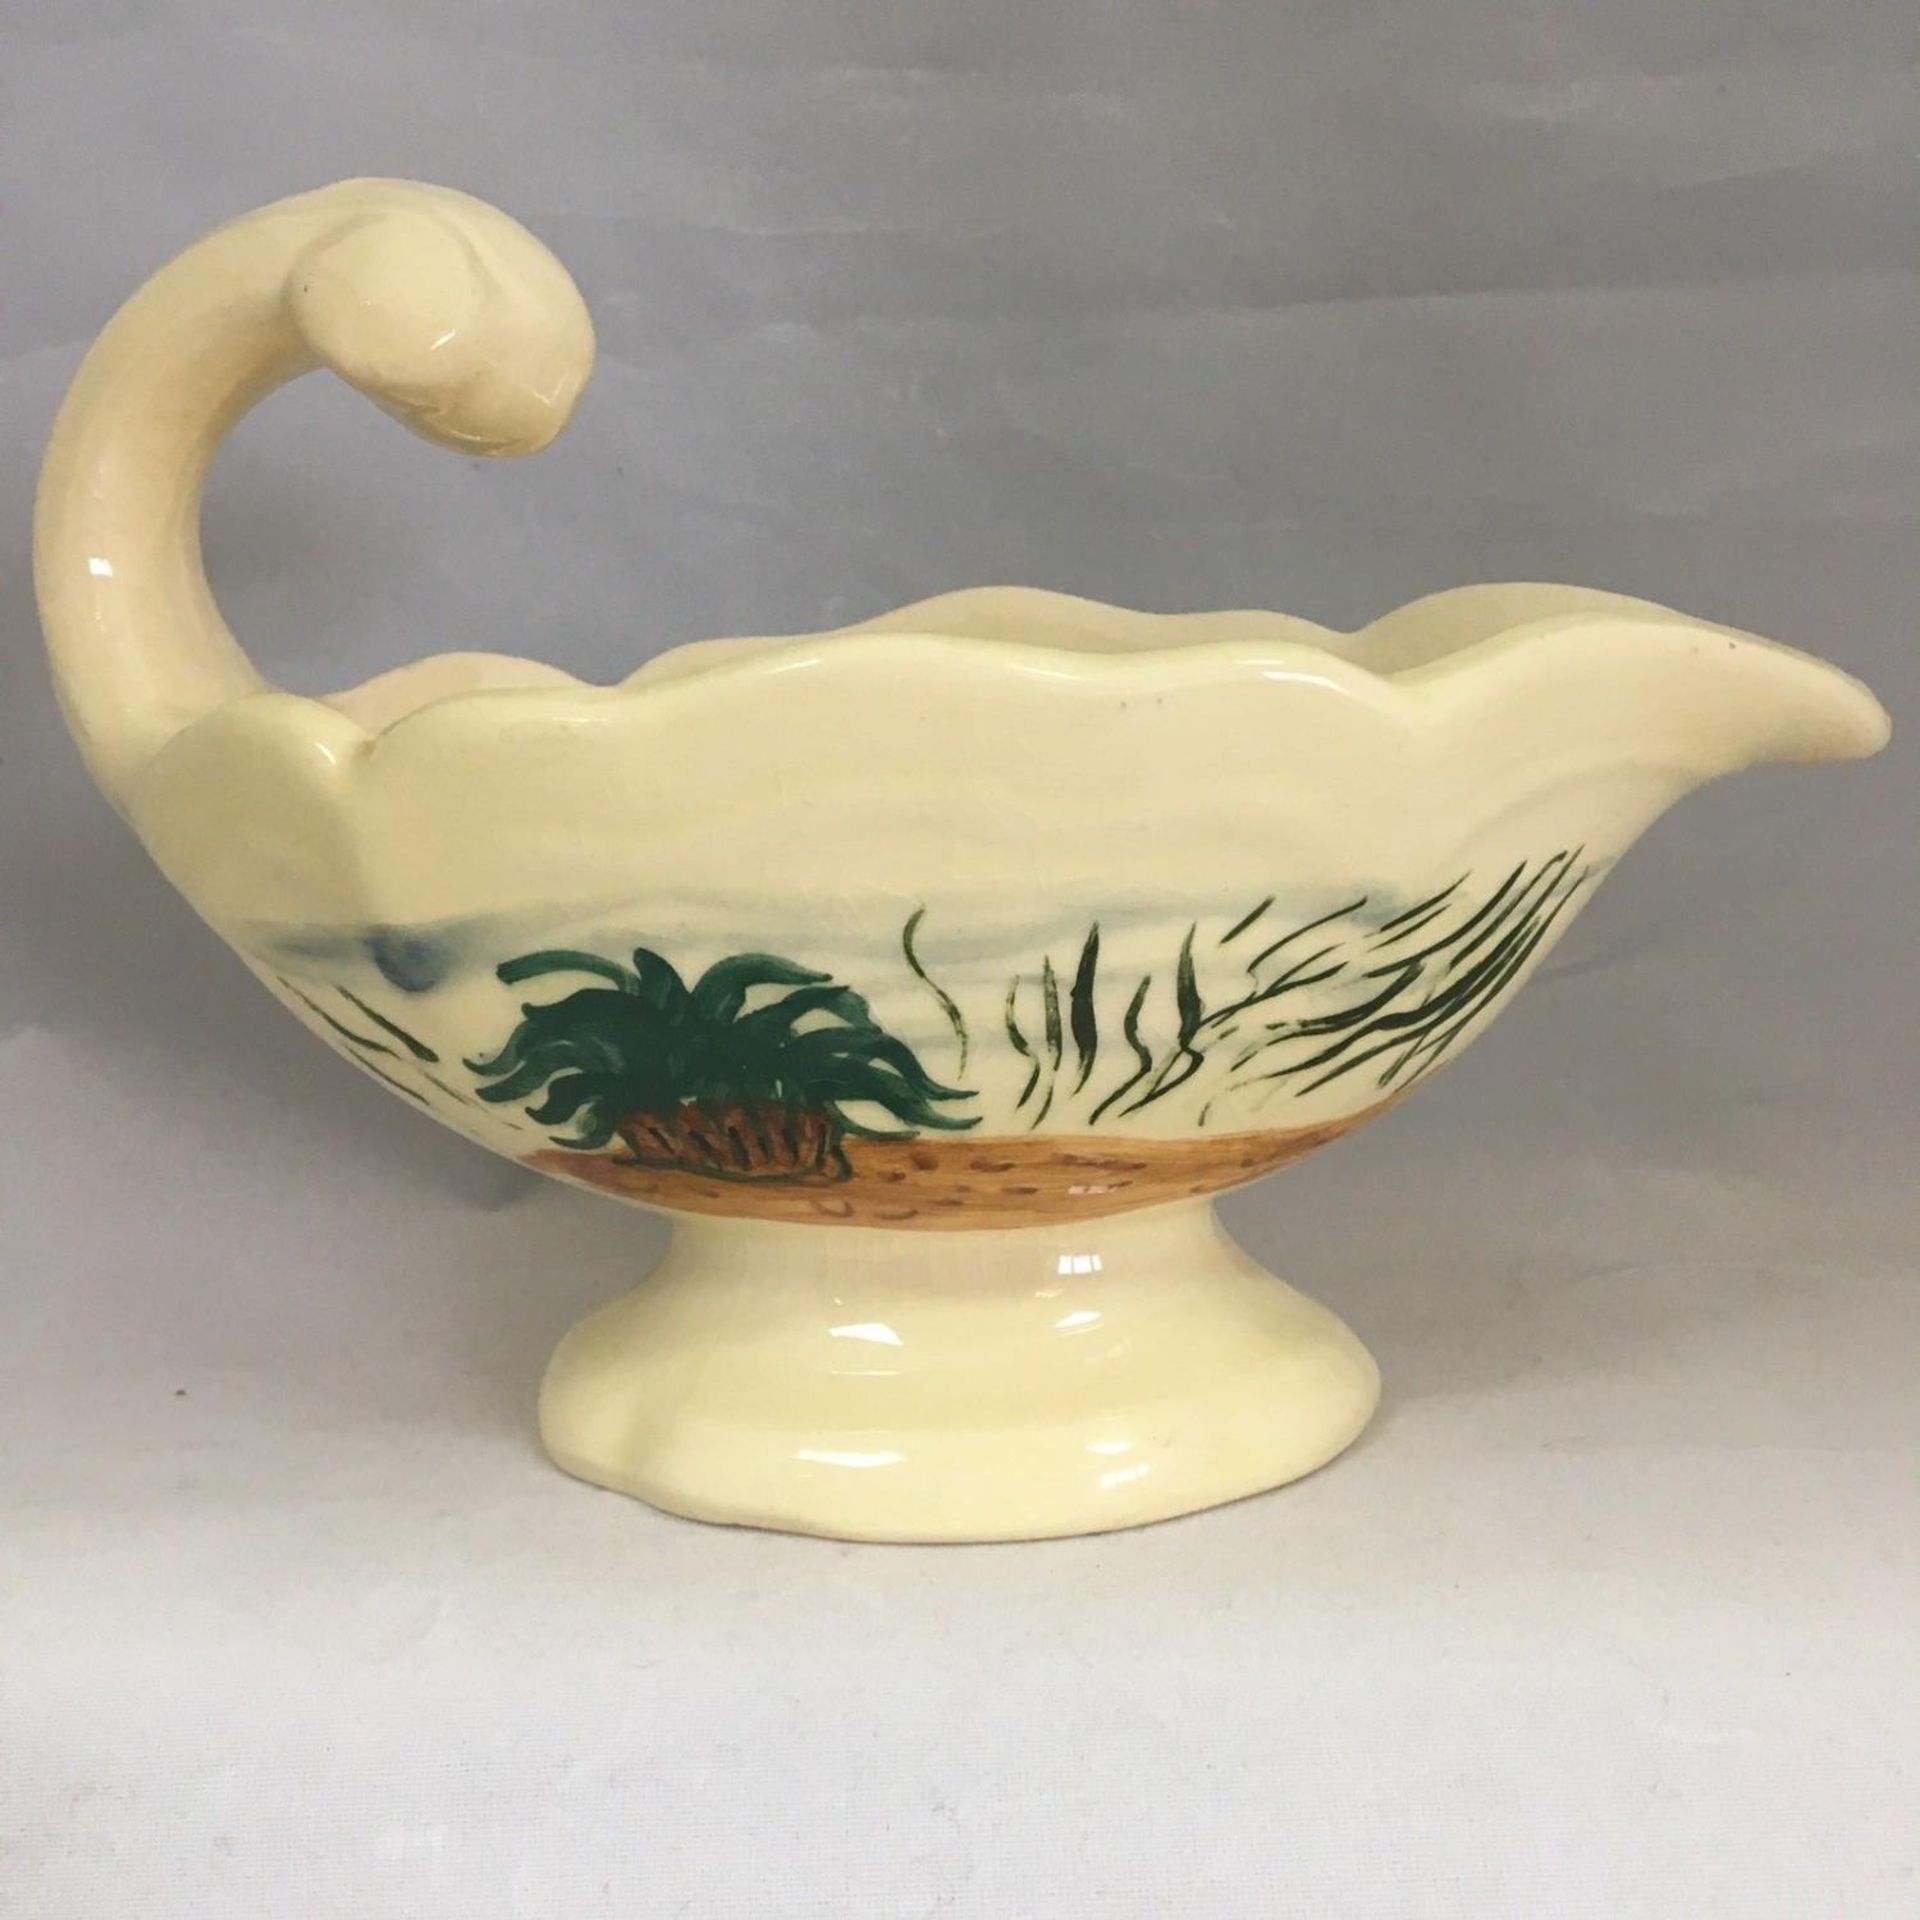 ANTIQUE J CARLES PROVENCE FISH GRAVY SAUCE BOAT HAND PAINTED FRENCH POTTERY - Image 2 of 3